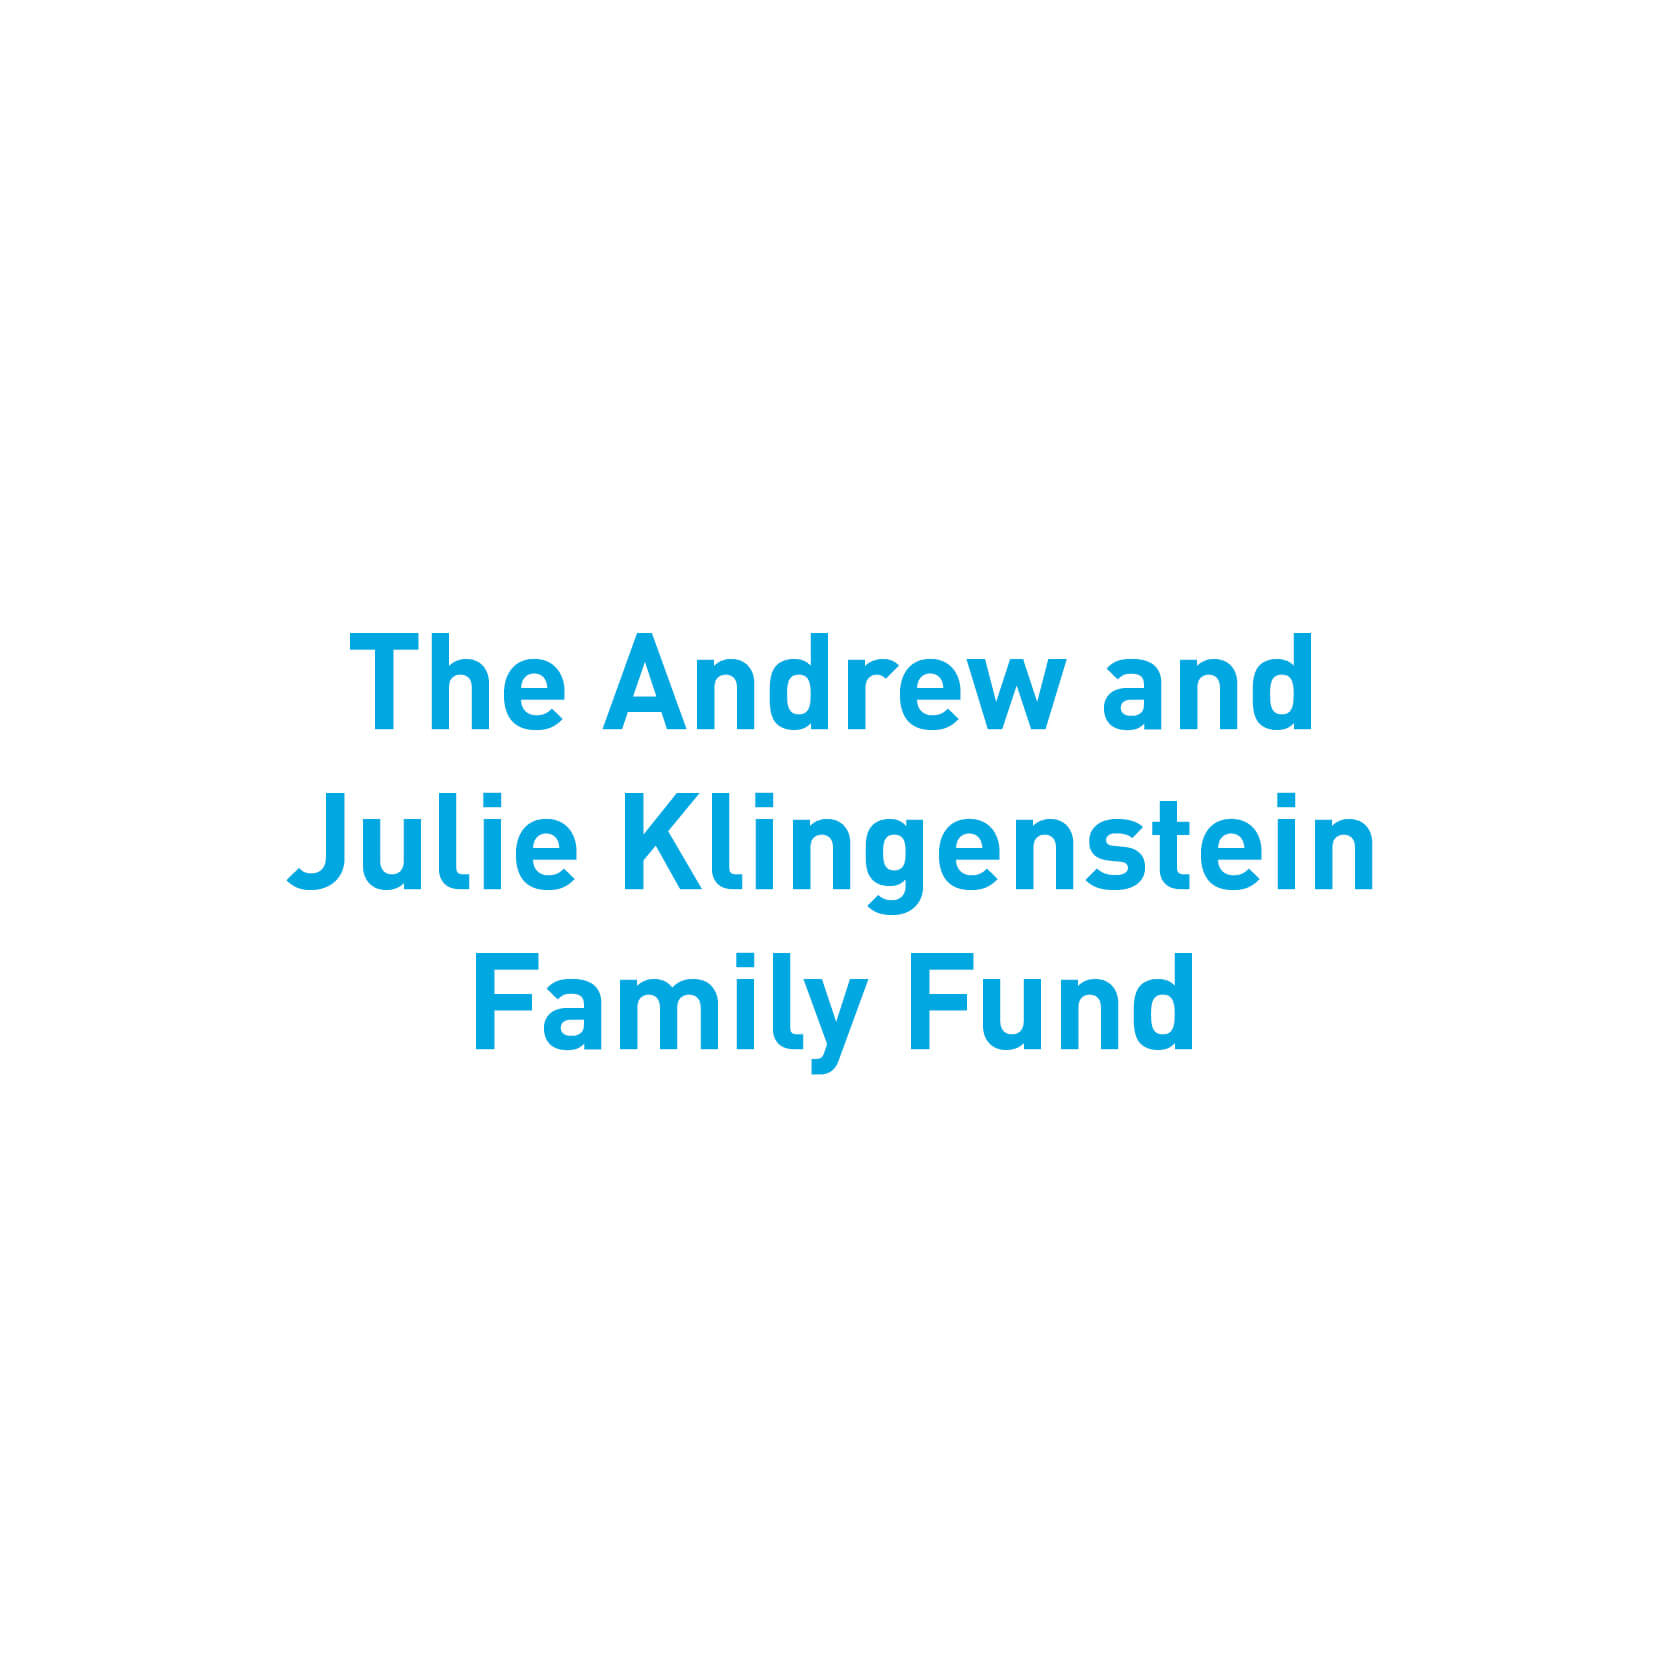 The Andrew and Julie Klingenstein Family Fund